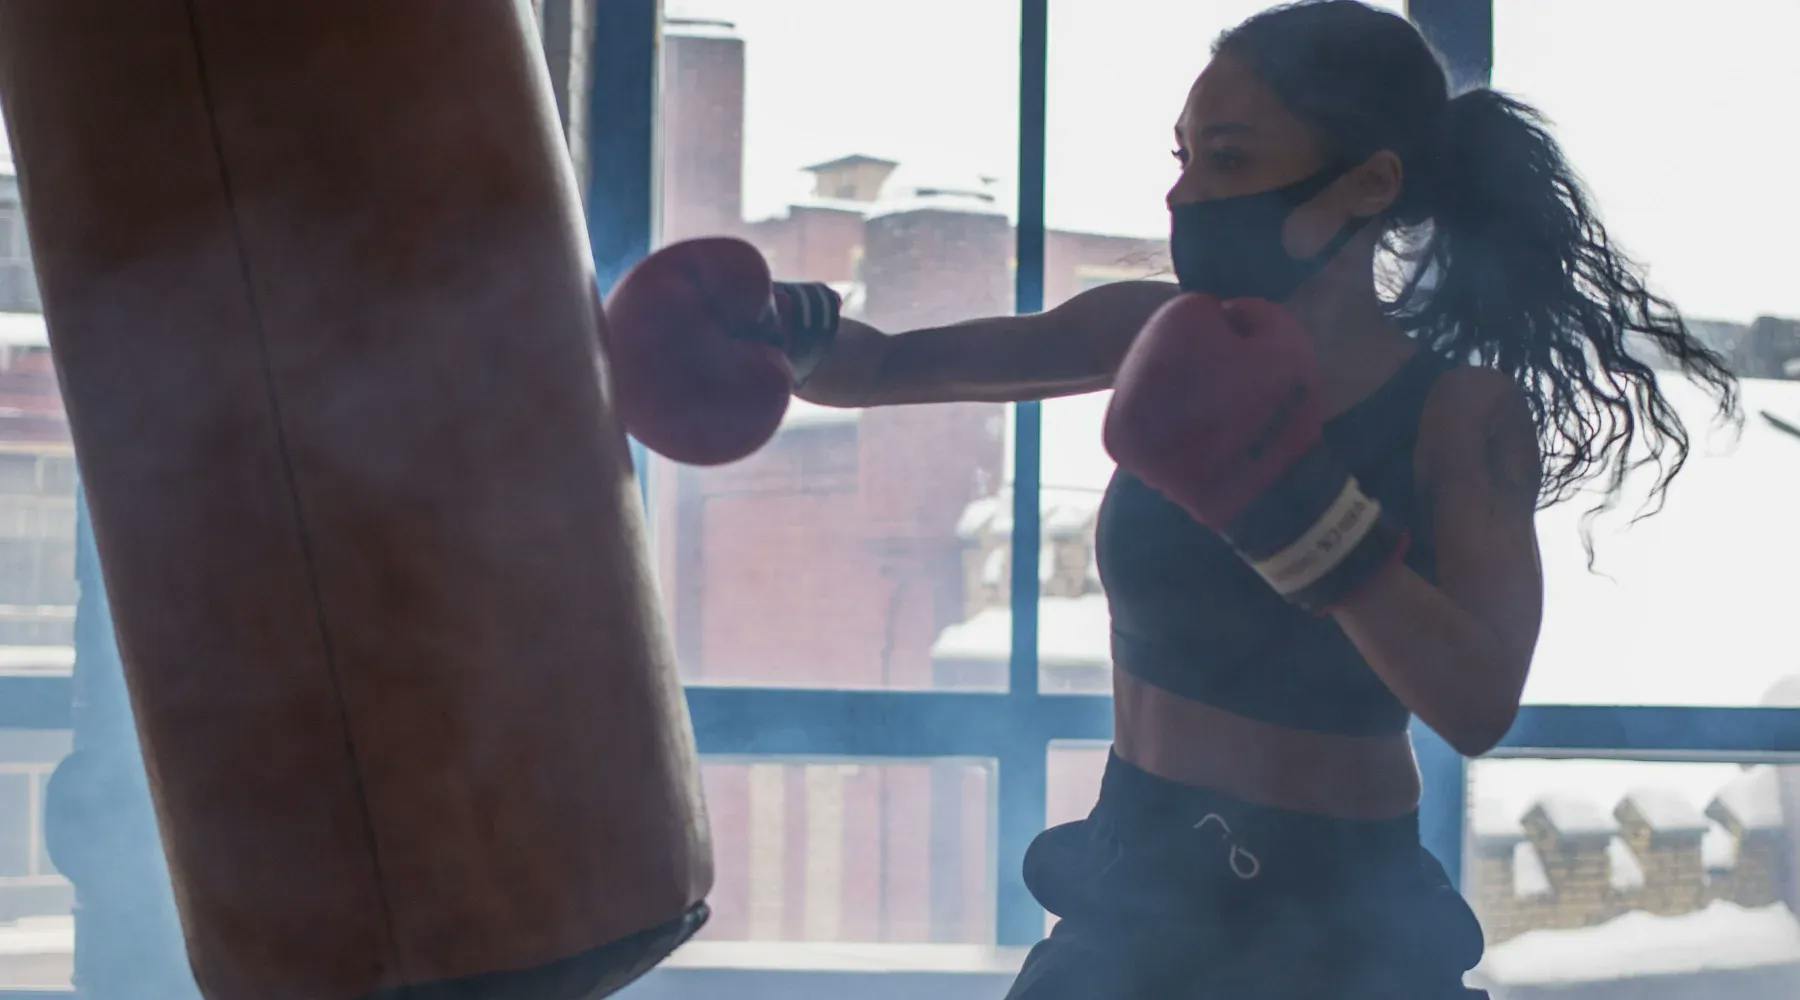 A young woman in athletic gear trains with boxing gloves and a heavy bag.